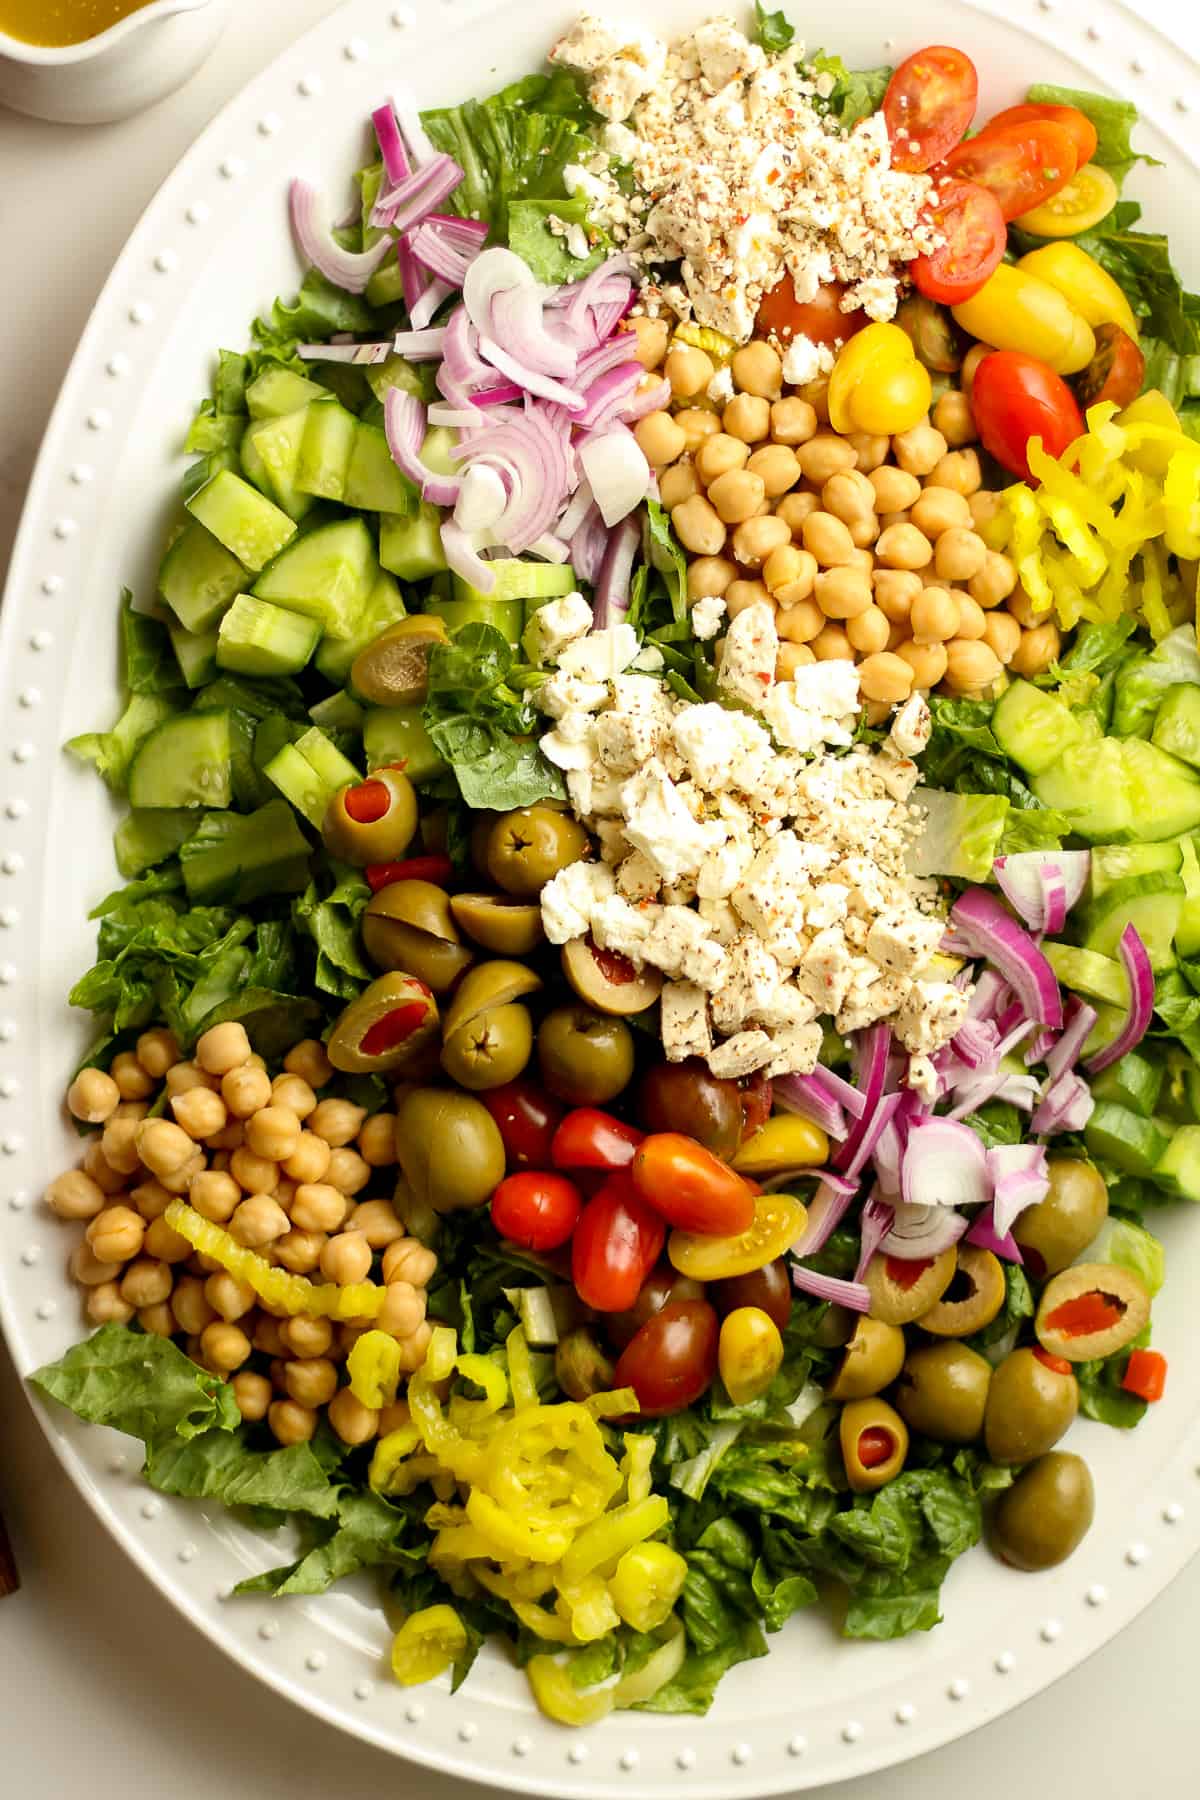 A platter of the Mediterranean chopped salad with veggies.